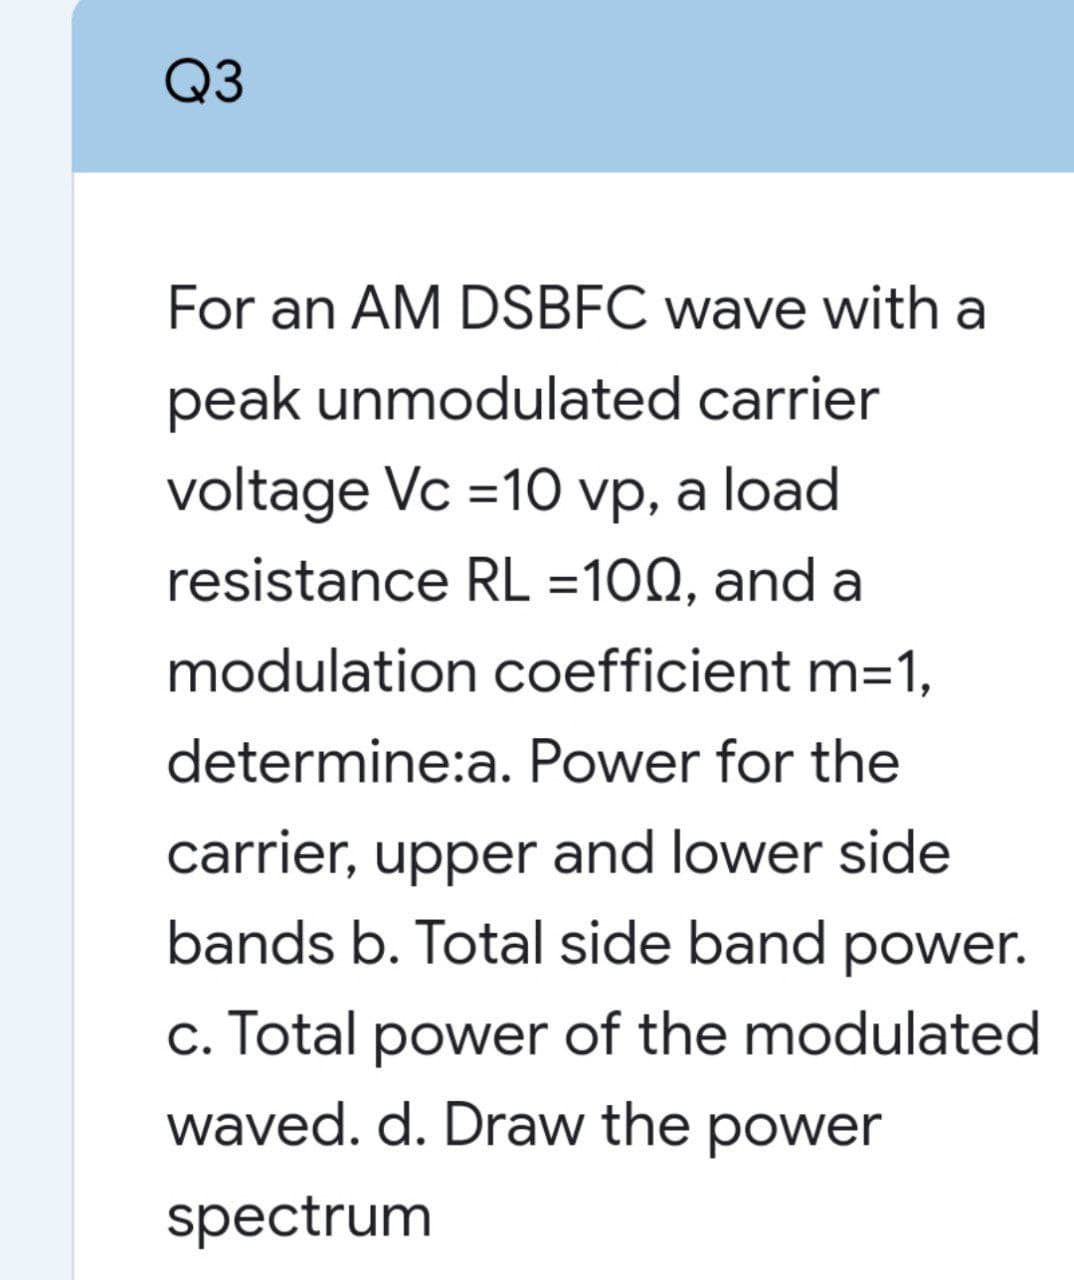 Q3
For an AM DSBFC wave with a
peak unmodulated carrier
voltage Vc =10 vp, a load
resistance RL =100, and a
modulation coefficient m=1,
determine:a. Power for the
carrier, upper and lower side
bands b. Total side band power.
c. Total power of the modulated
waved. d. Draw the power
spectrum
